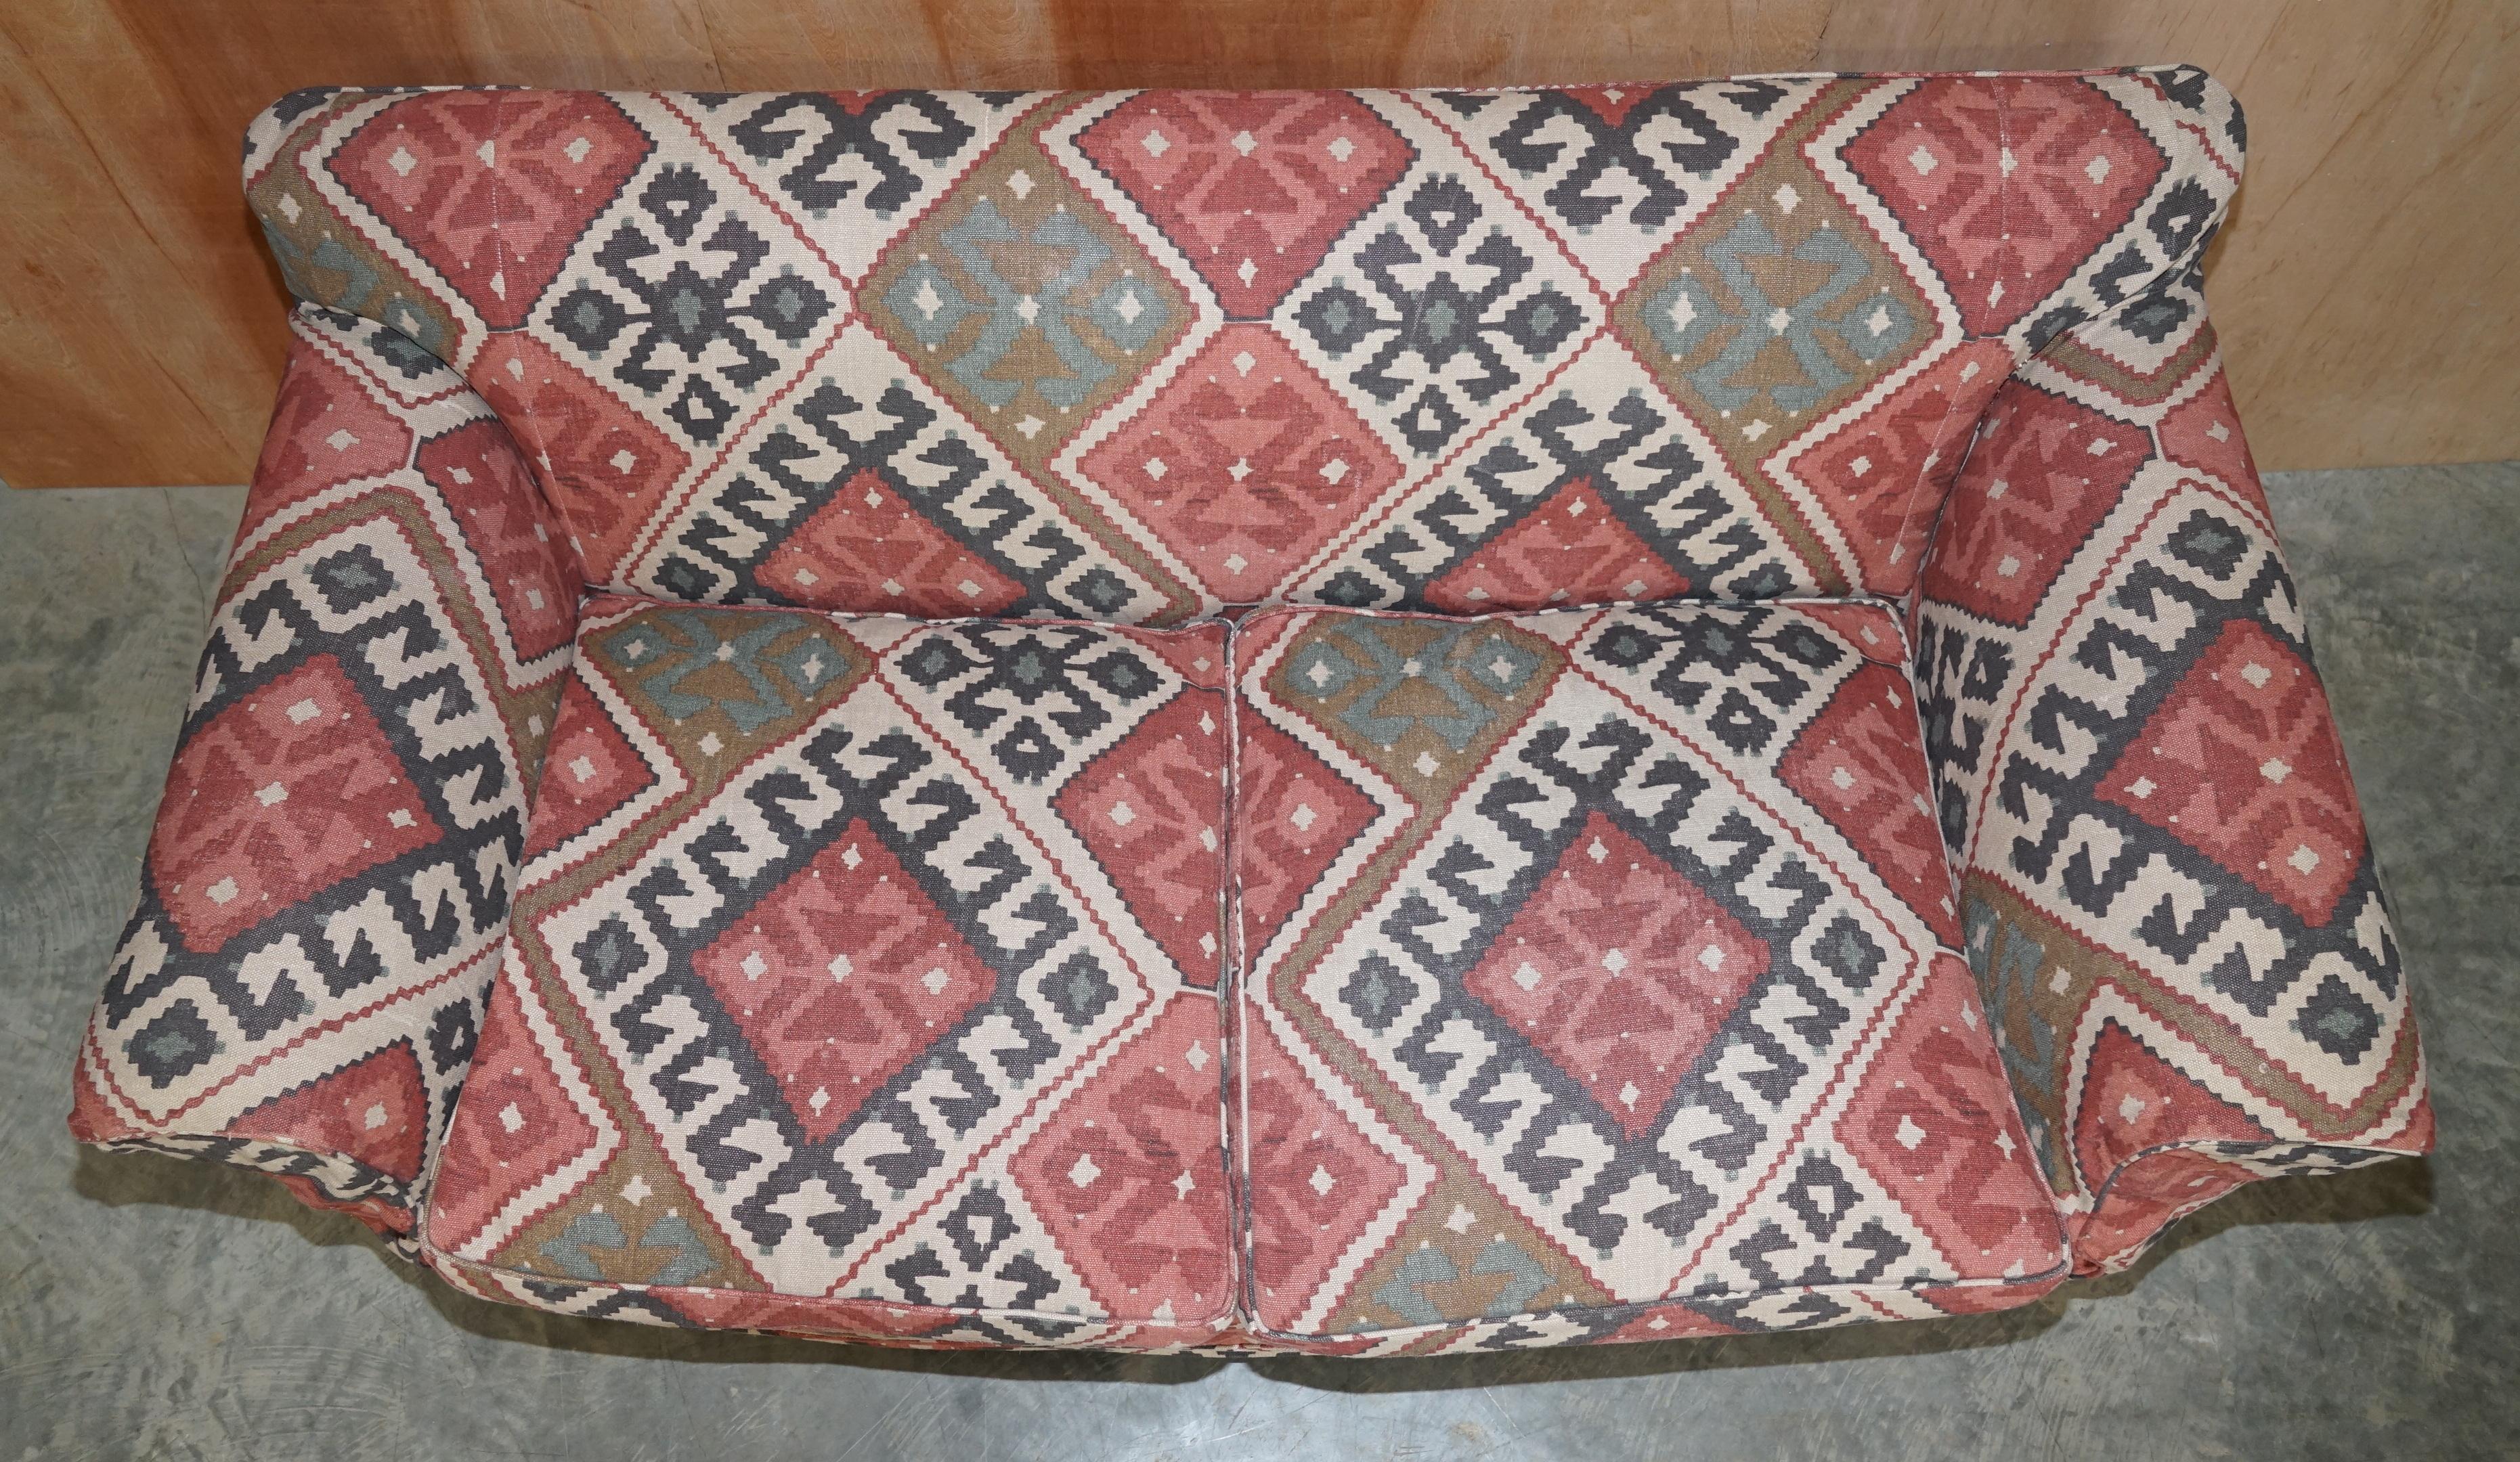 19th Century Exquisite Original Victorian Kilim Upholstered Sofa Hardwood Turned Front Legs For Sale